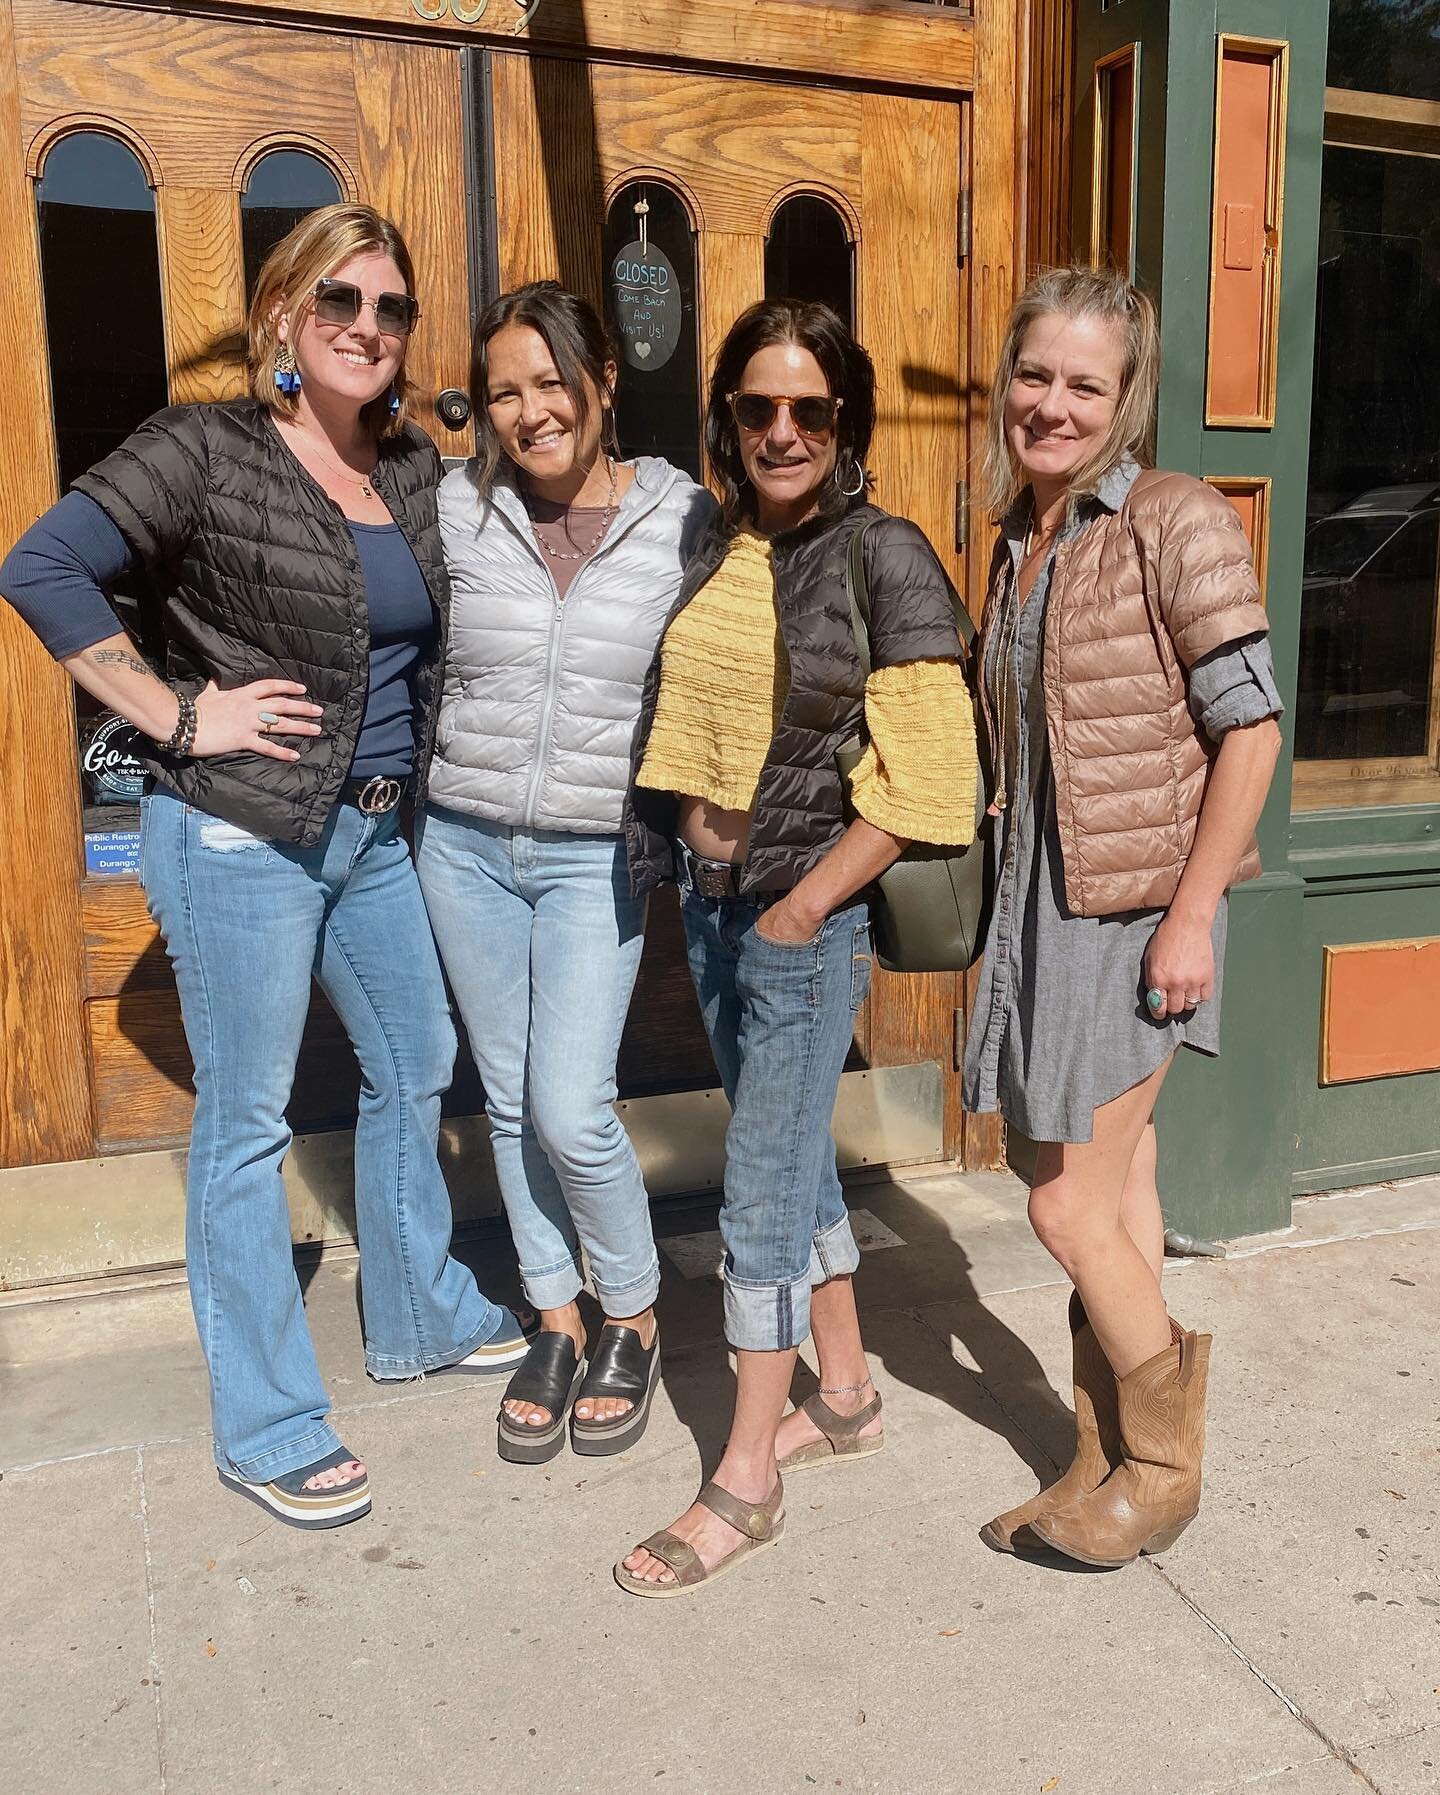 Lively is very excited to continue to collaborate with this dynamic duo Laurie and Leticia! This women&rsquo;s owned business is local and their short sleeve puffys are now a fashion statement in town and beyond! Misty, Johnna, Laurie and Leticia had